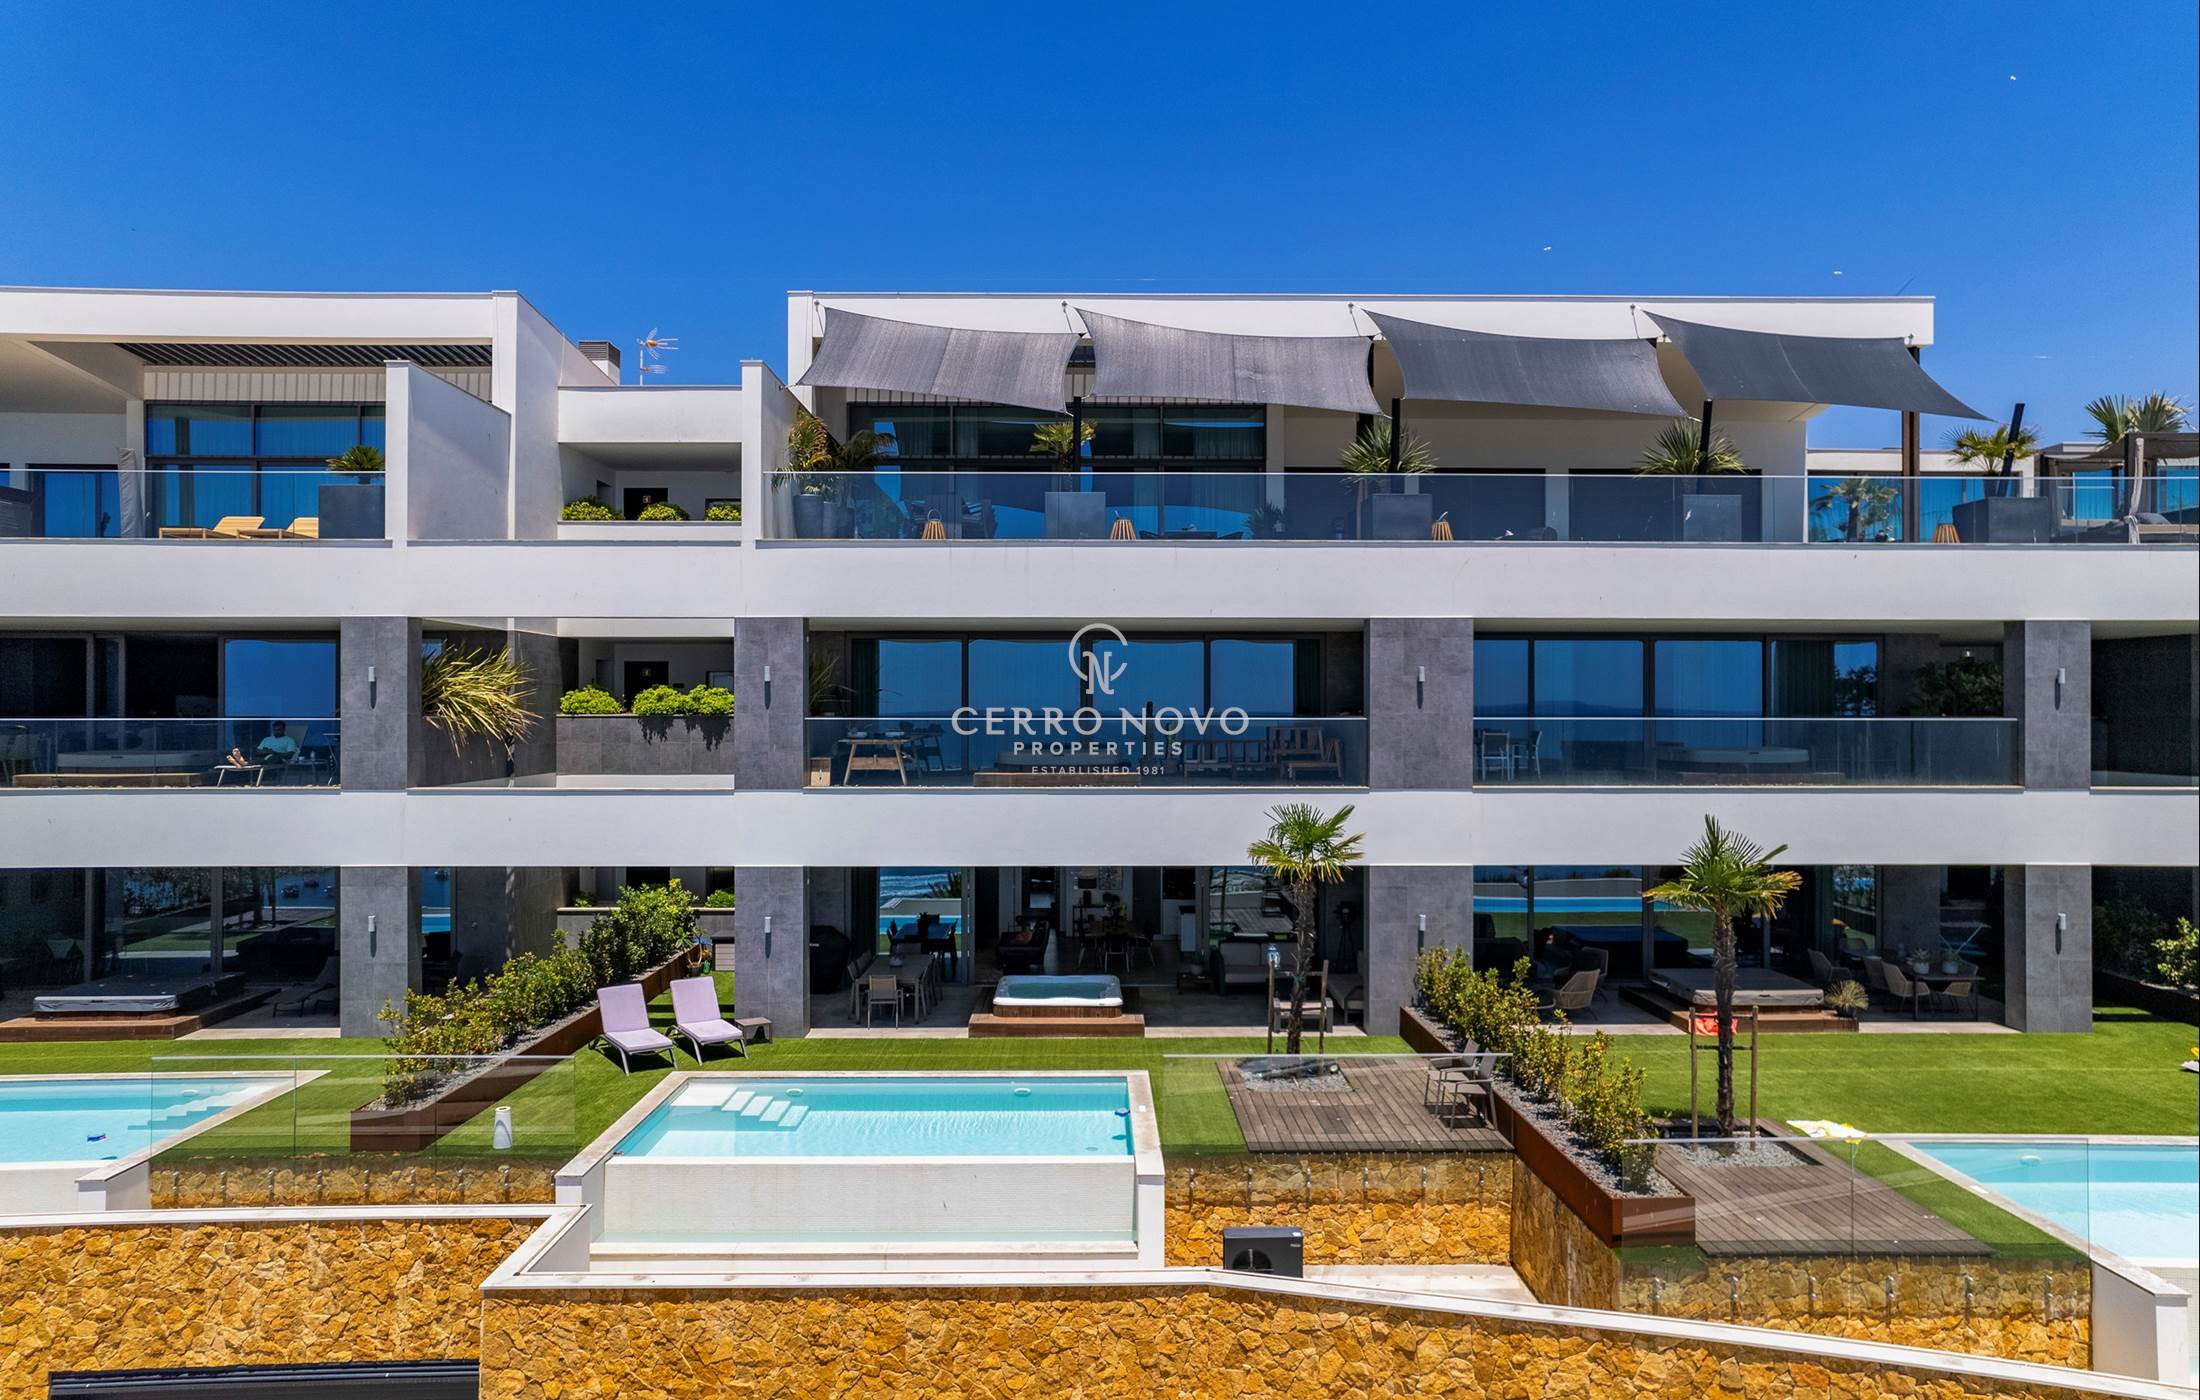 A luxury T3 apartment in a prime, front-line west Albufeira location